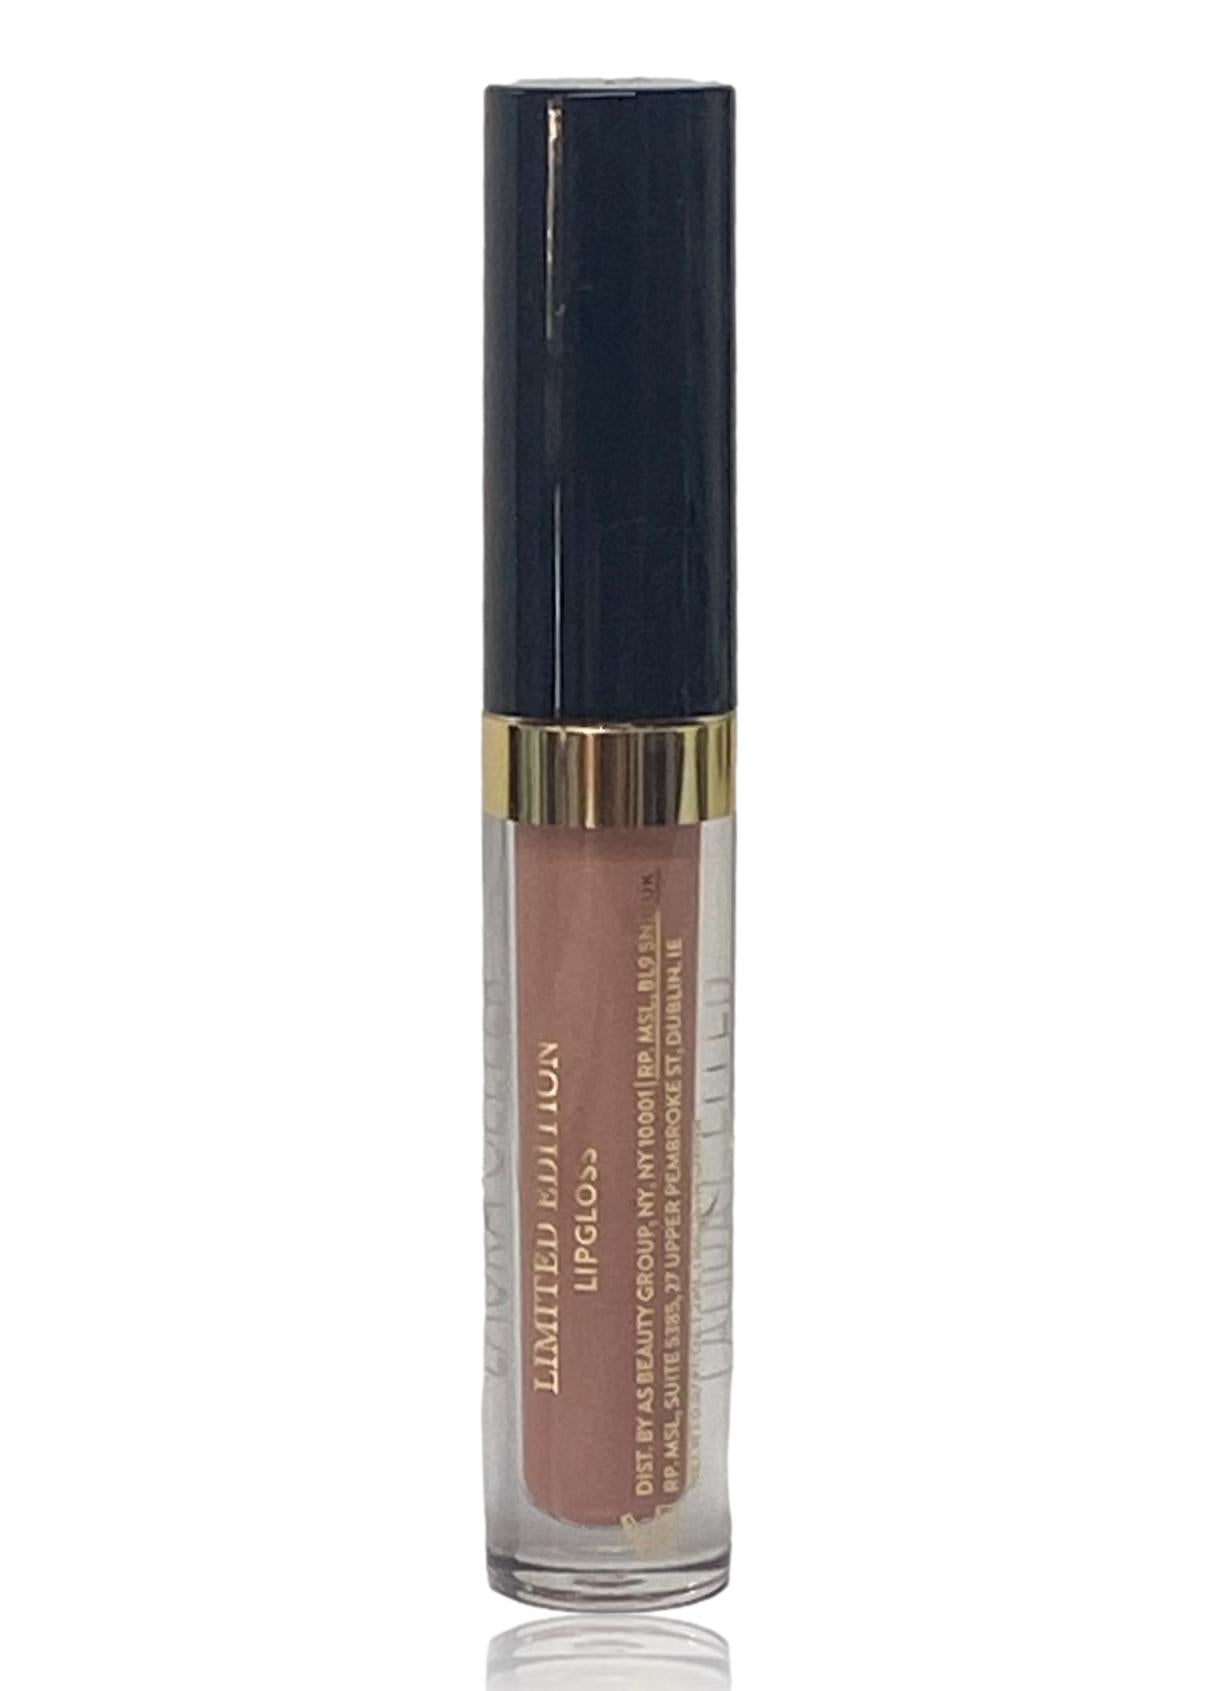 LAURA GELLER  Limited Edition Lip Gloss in Perfect peach Shimmer (2.0ml)